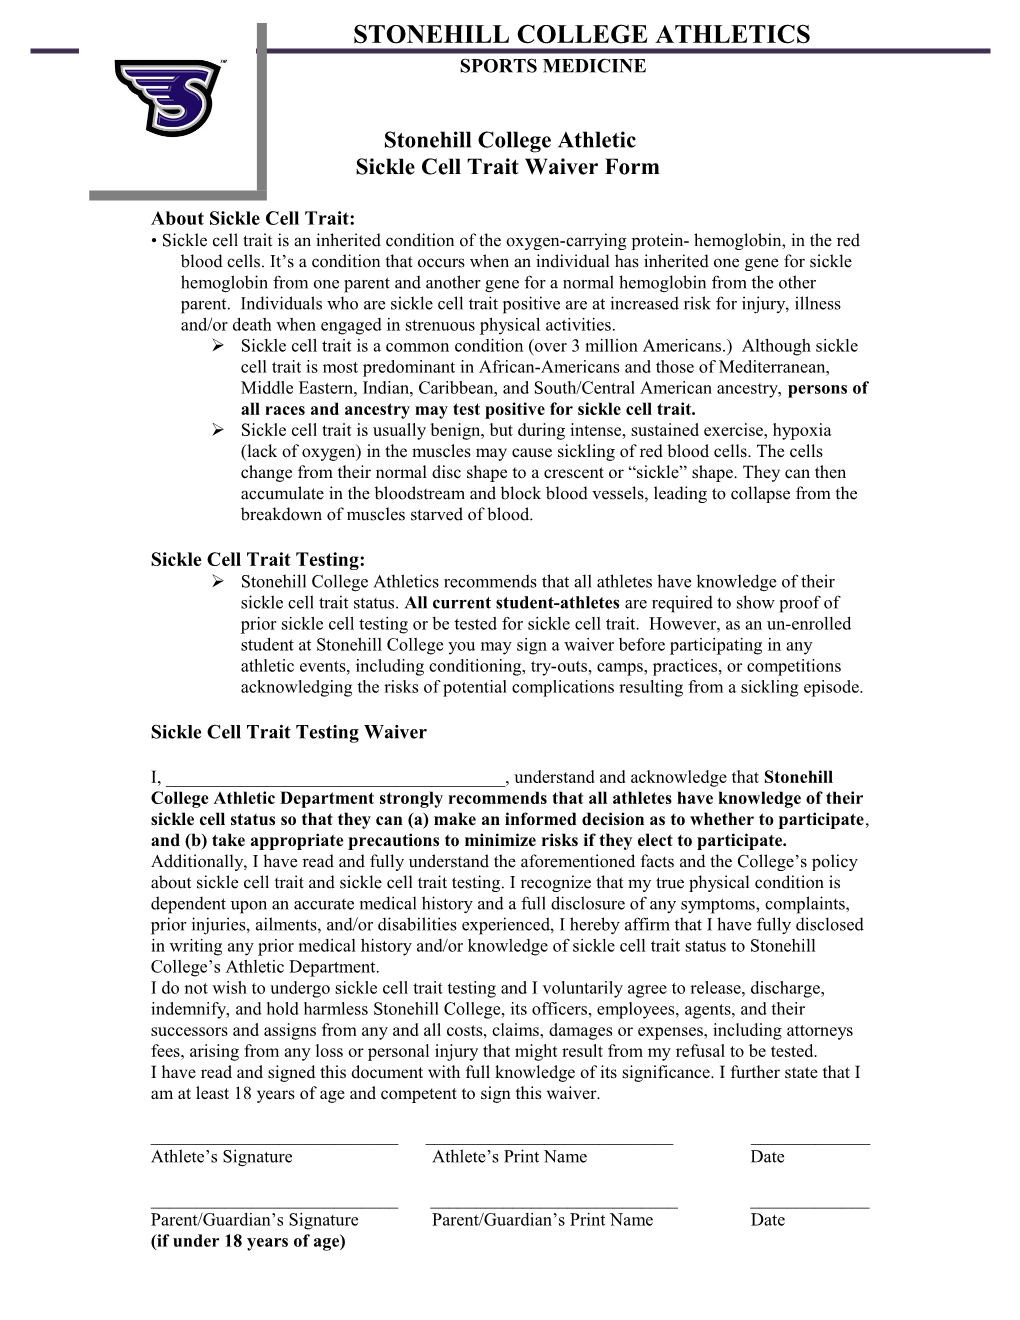 Sickle Cell Trait Waiver Form